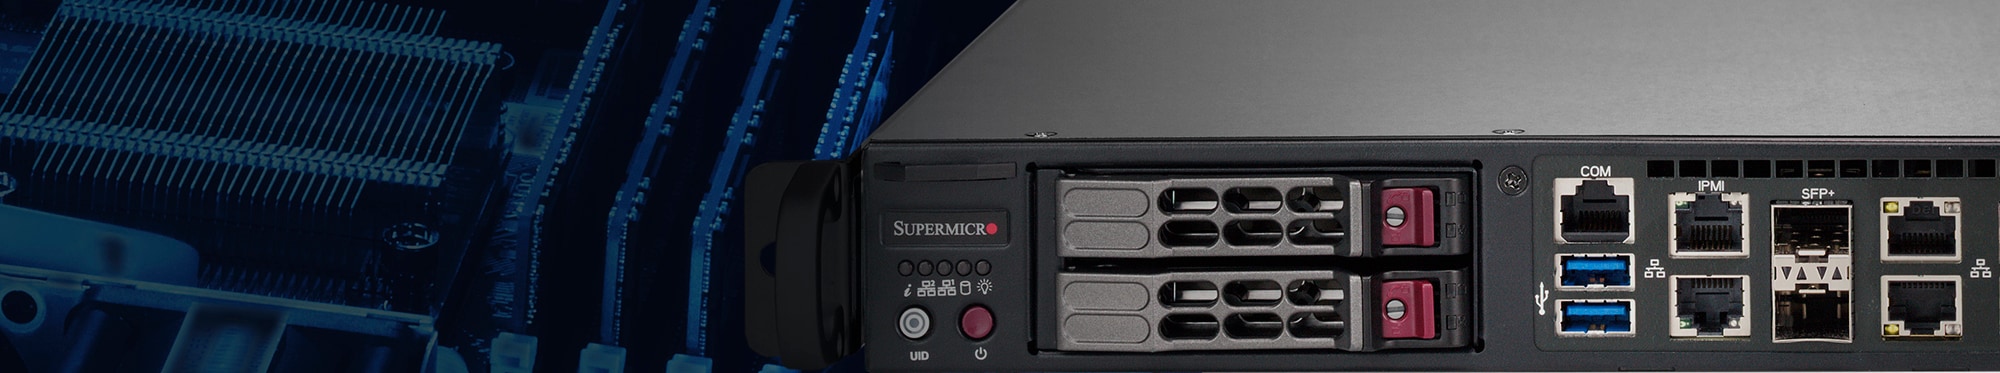 Embedded SuperServers | Supermicro